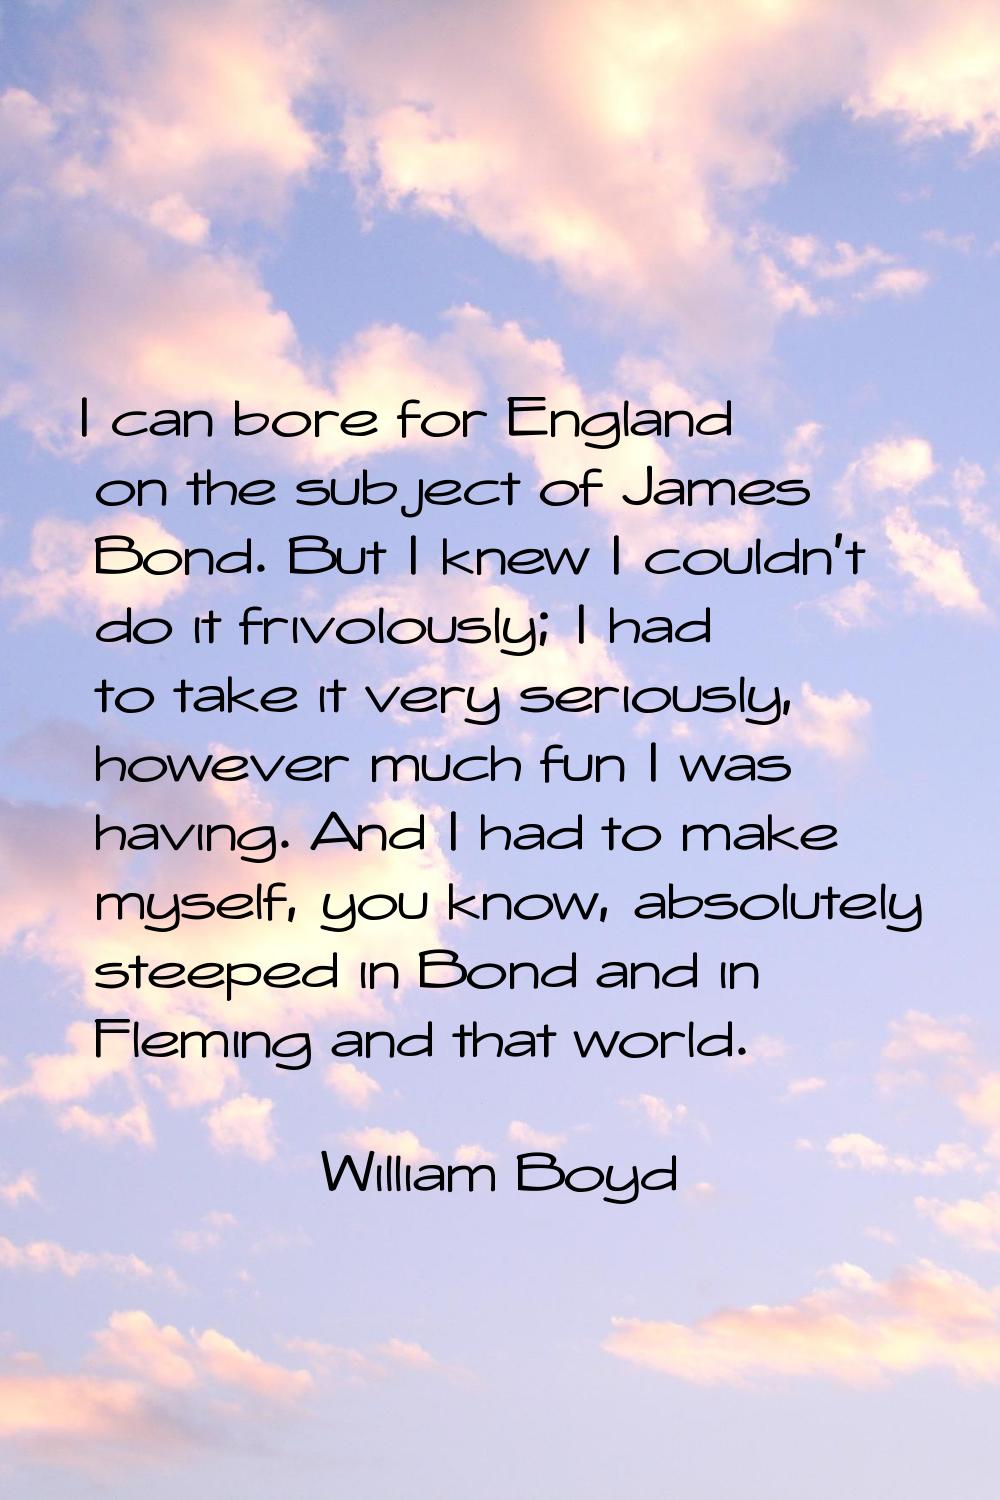 I can bore for England on the subject of James Bond. But I knew I couldn't do it frivolously; I had